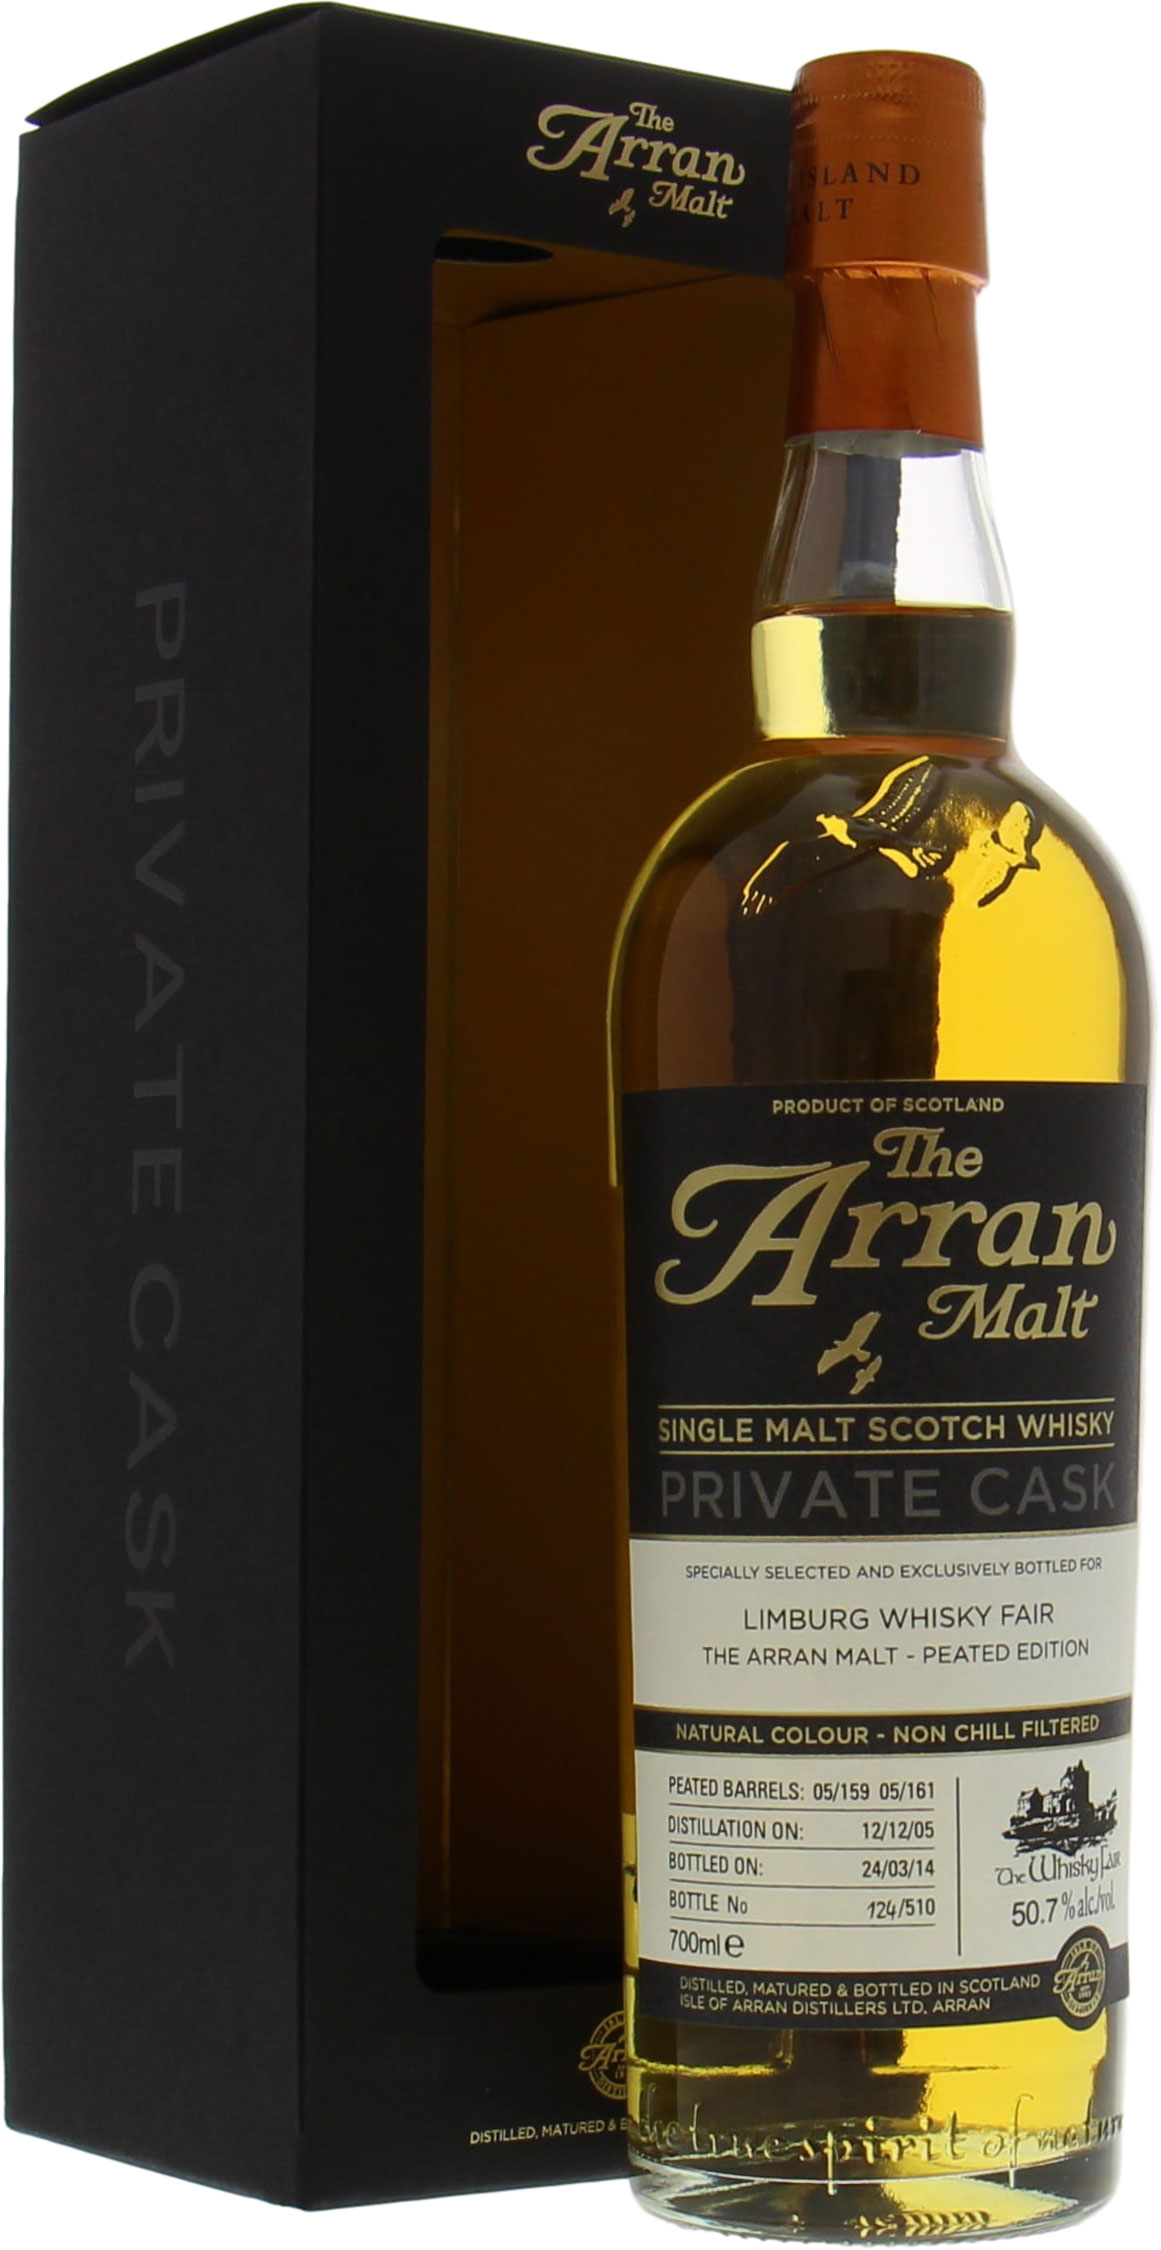 Arran - 8 Years Old The Whisky Fair 2014 Peated Cask:05/159+05/161 50.7% 2005 In Original Container